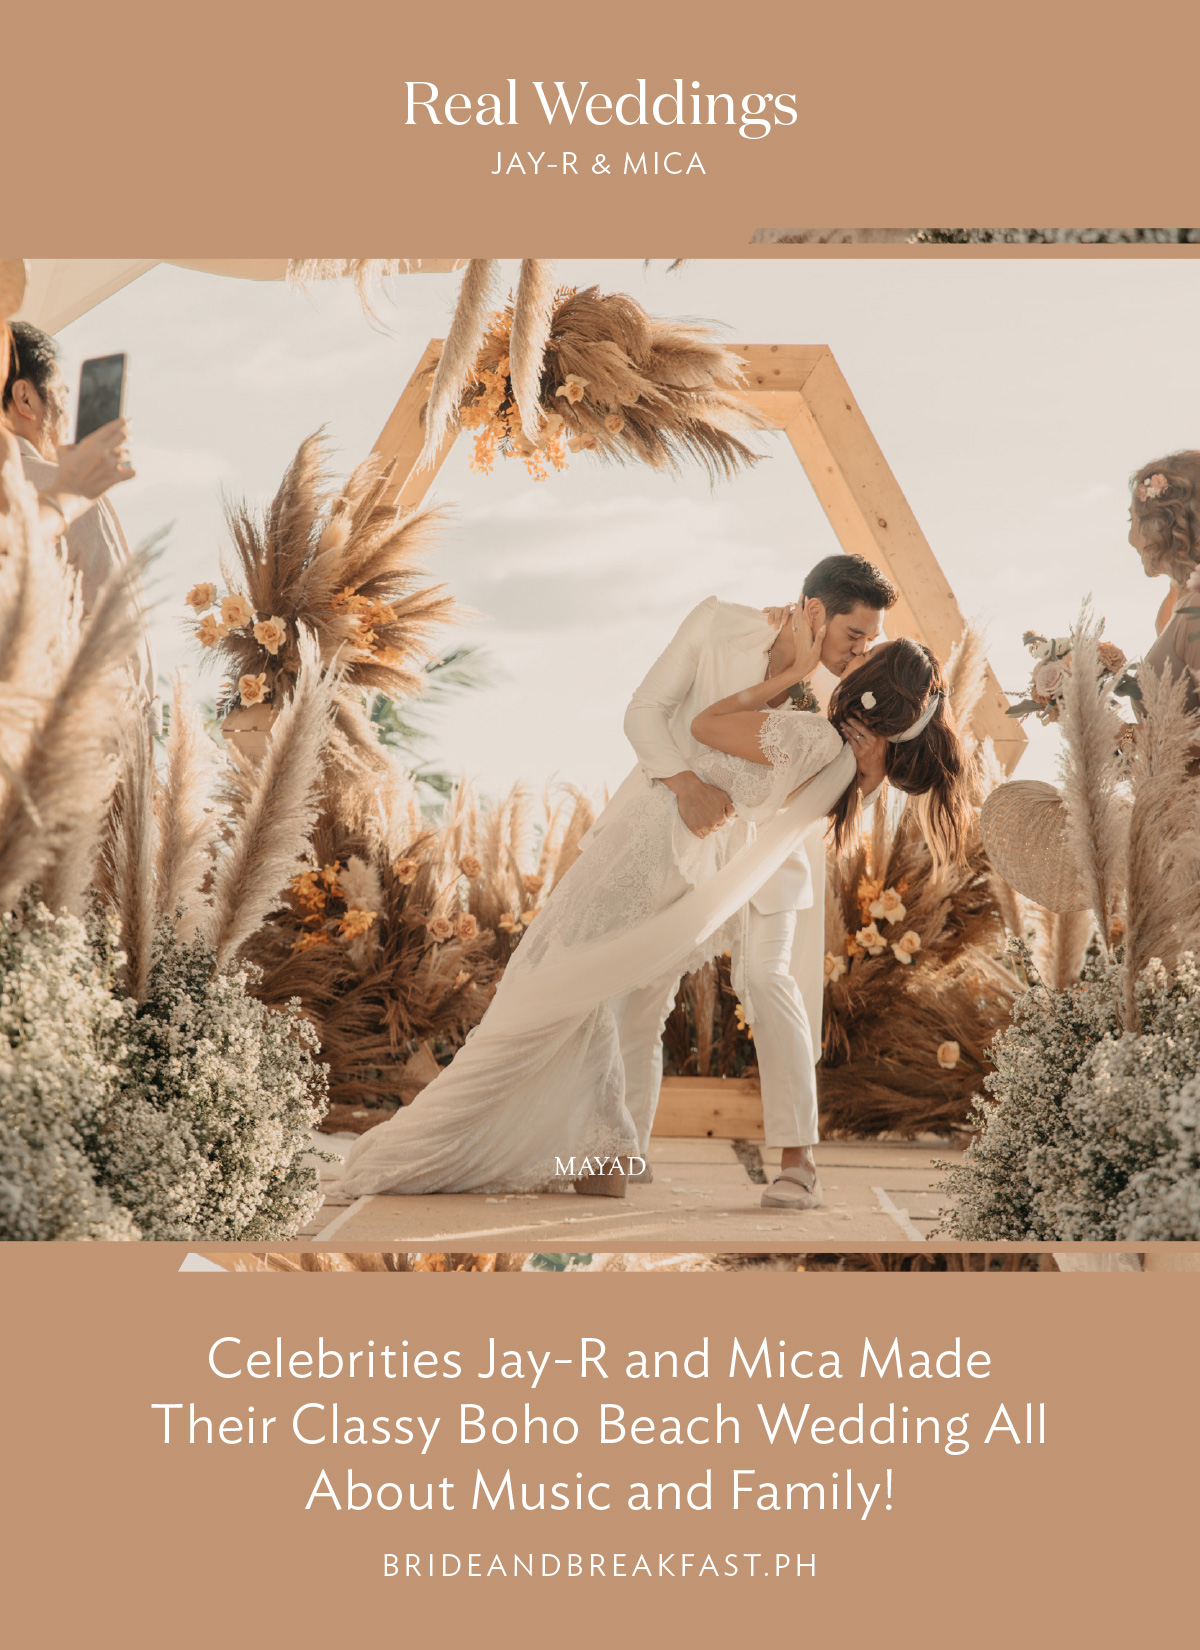 Celebrities Jay-R and Mica Made Their Classy Boho Beach Wedding All About Music and Family!